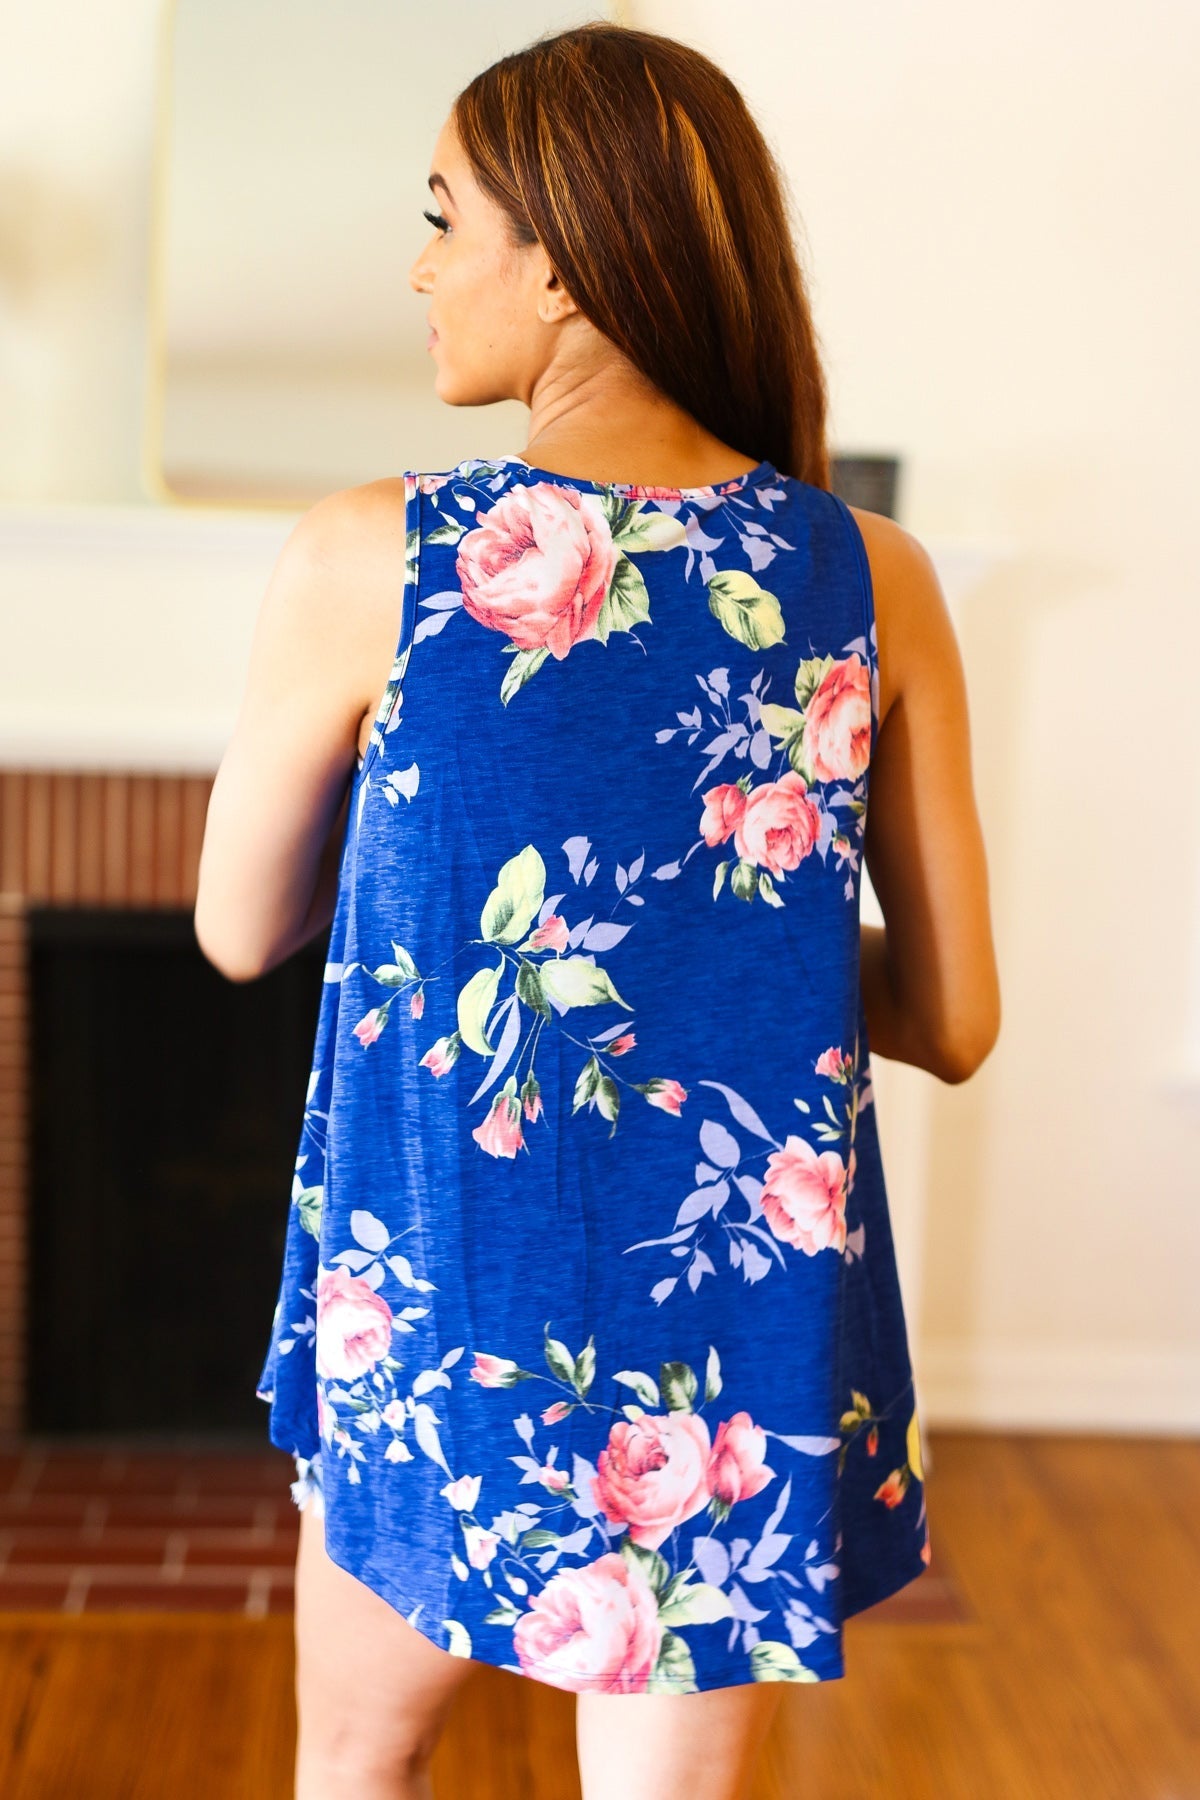 Sunny Days Navy Blue Floral Print Sleeveless Top (Shipping in 1-2 Weeks)